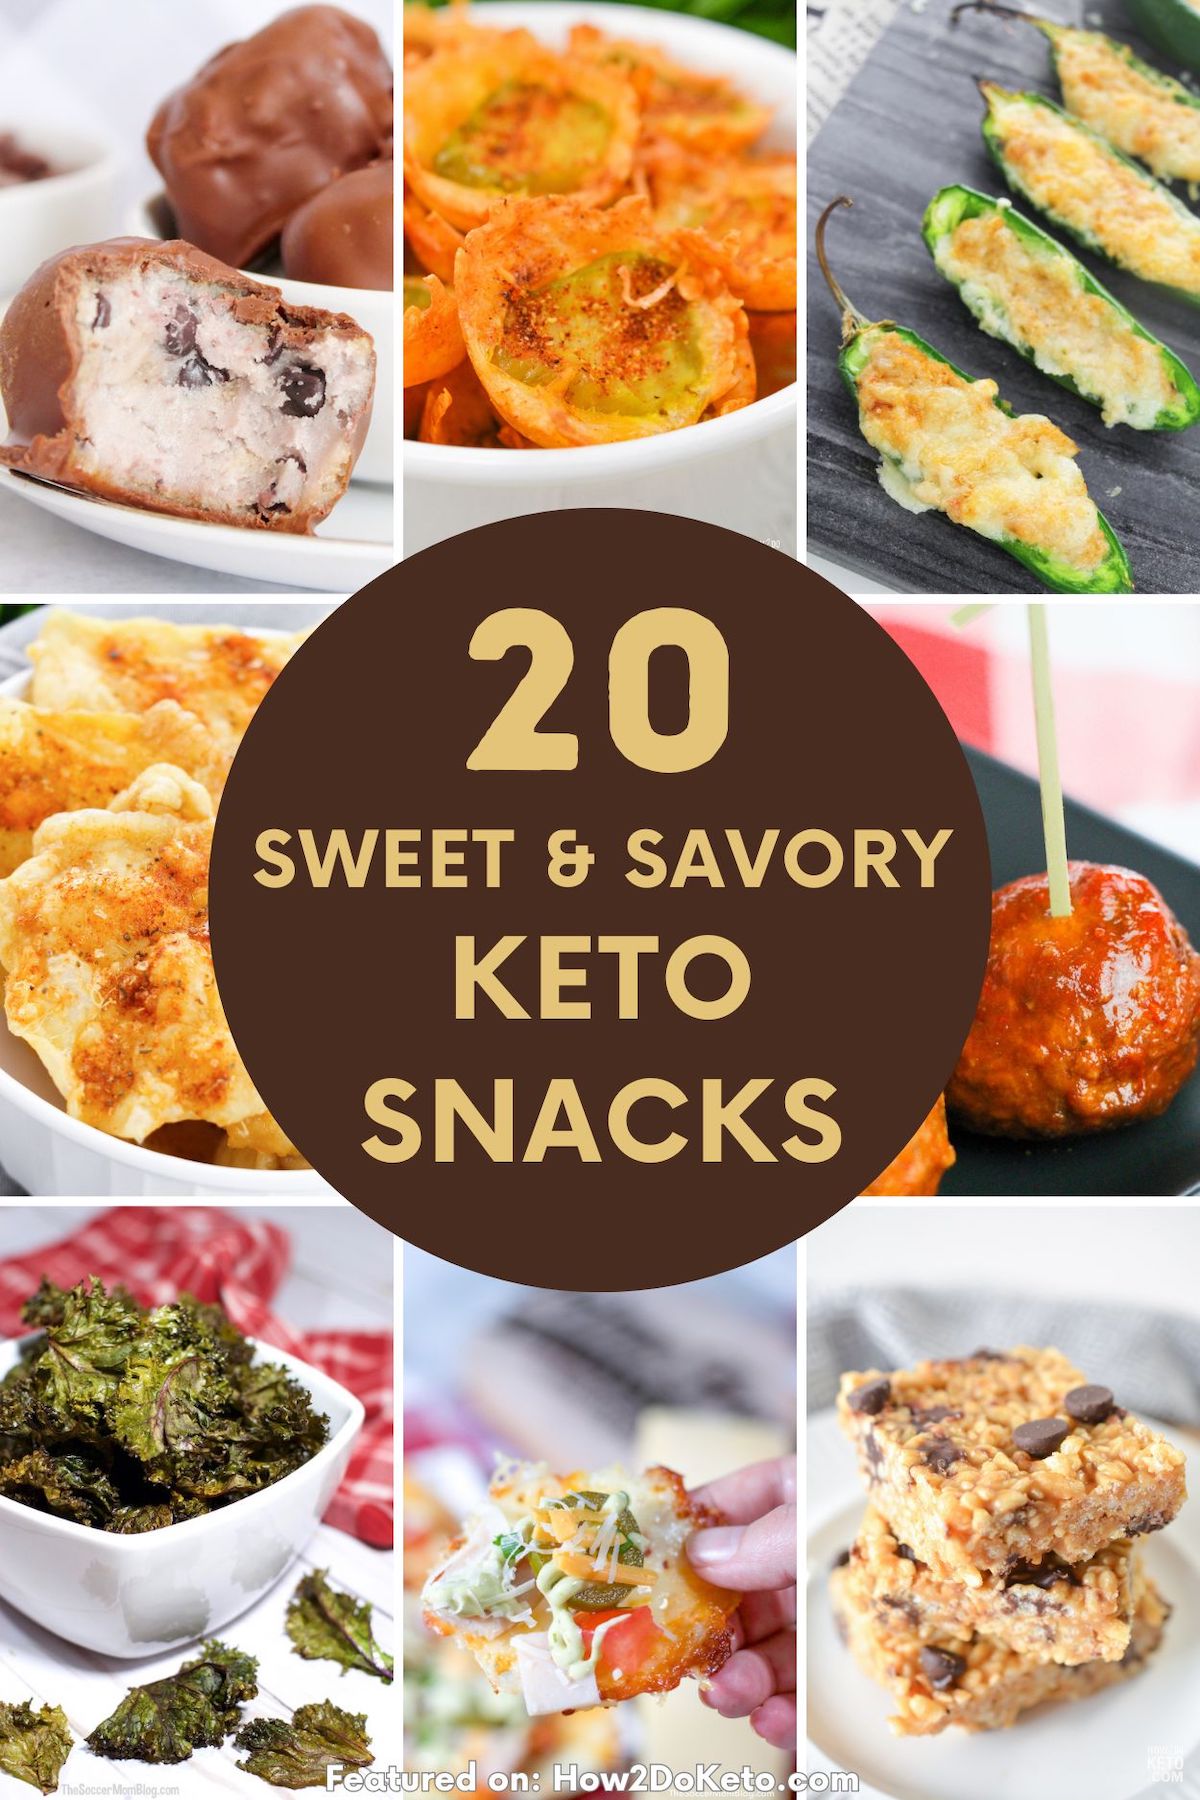 collage of low carb snack photos, text overlay "20 Sweet & Savory Keto Snacks".